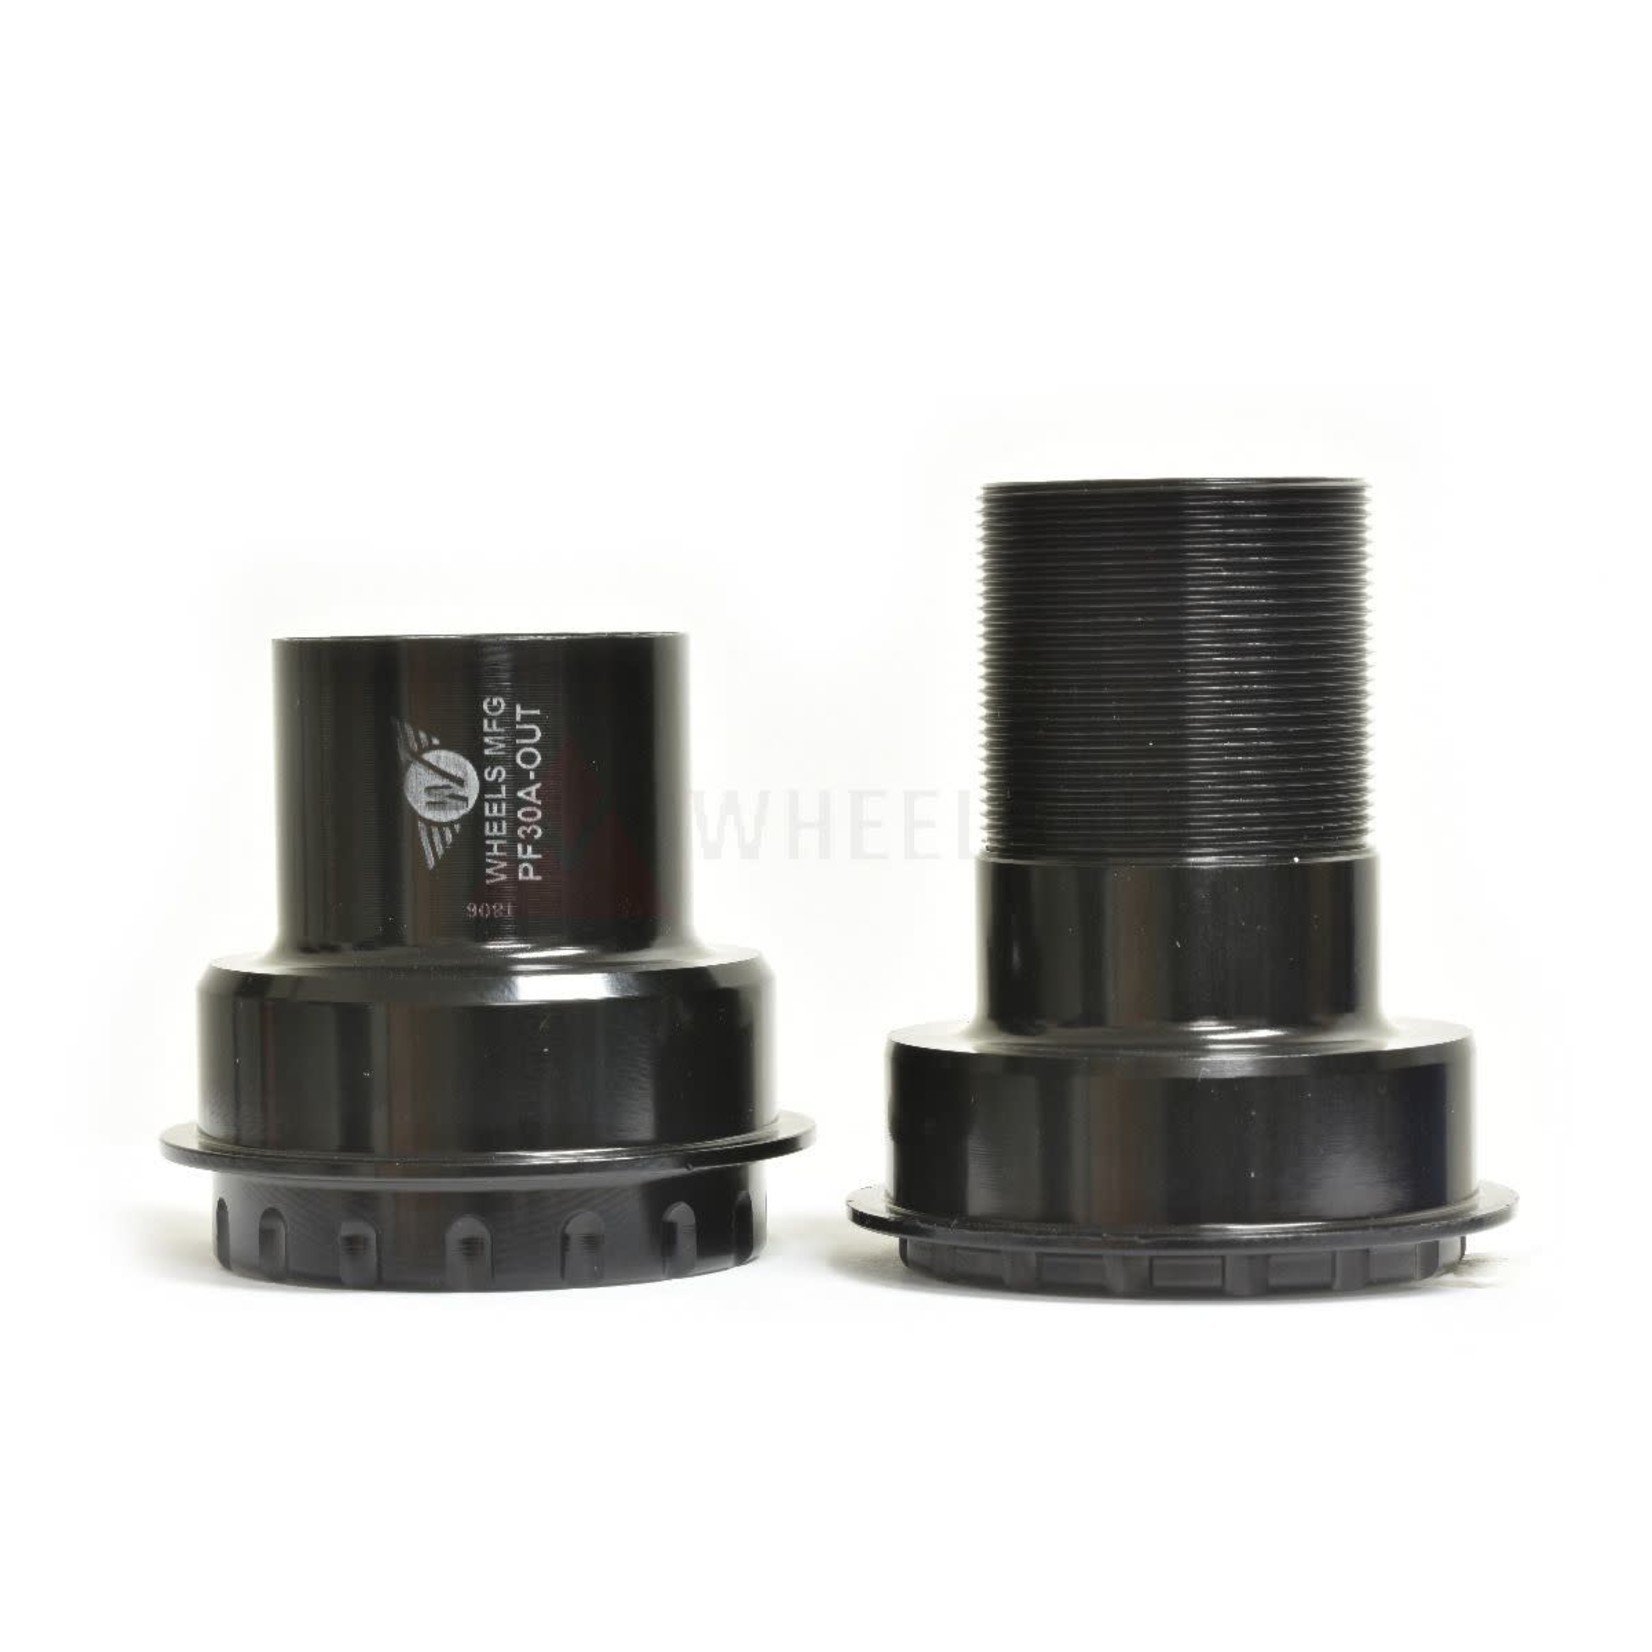 Wheels Manufacturing Wheels Mfg Bottom Bracket - PF30A Outboard Angular Contact BB for 24mm Cranks (Shimano)